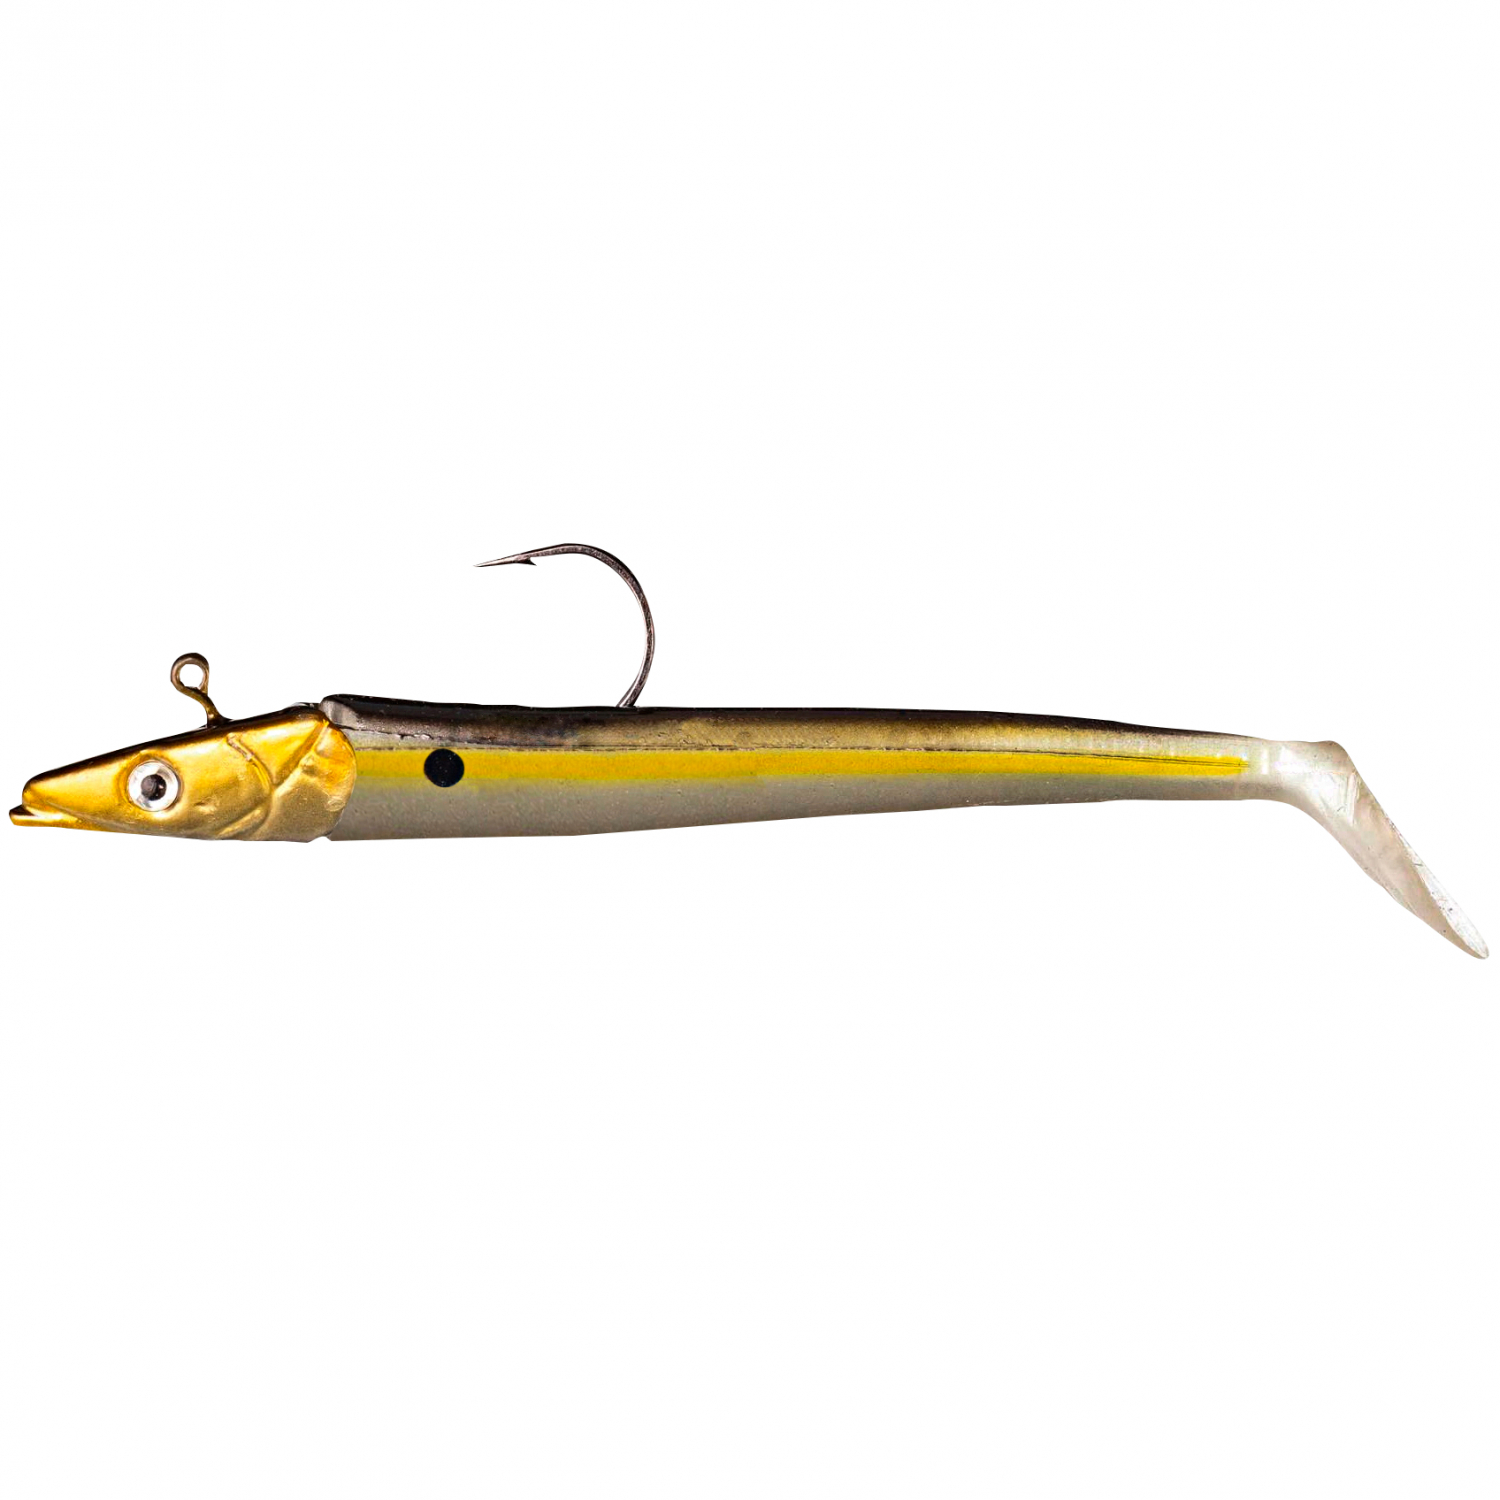 Seapoint Imitation rubber bait sand eel (natural) 